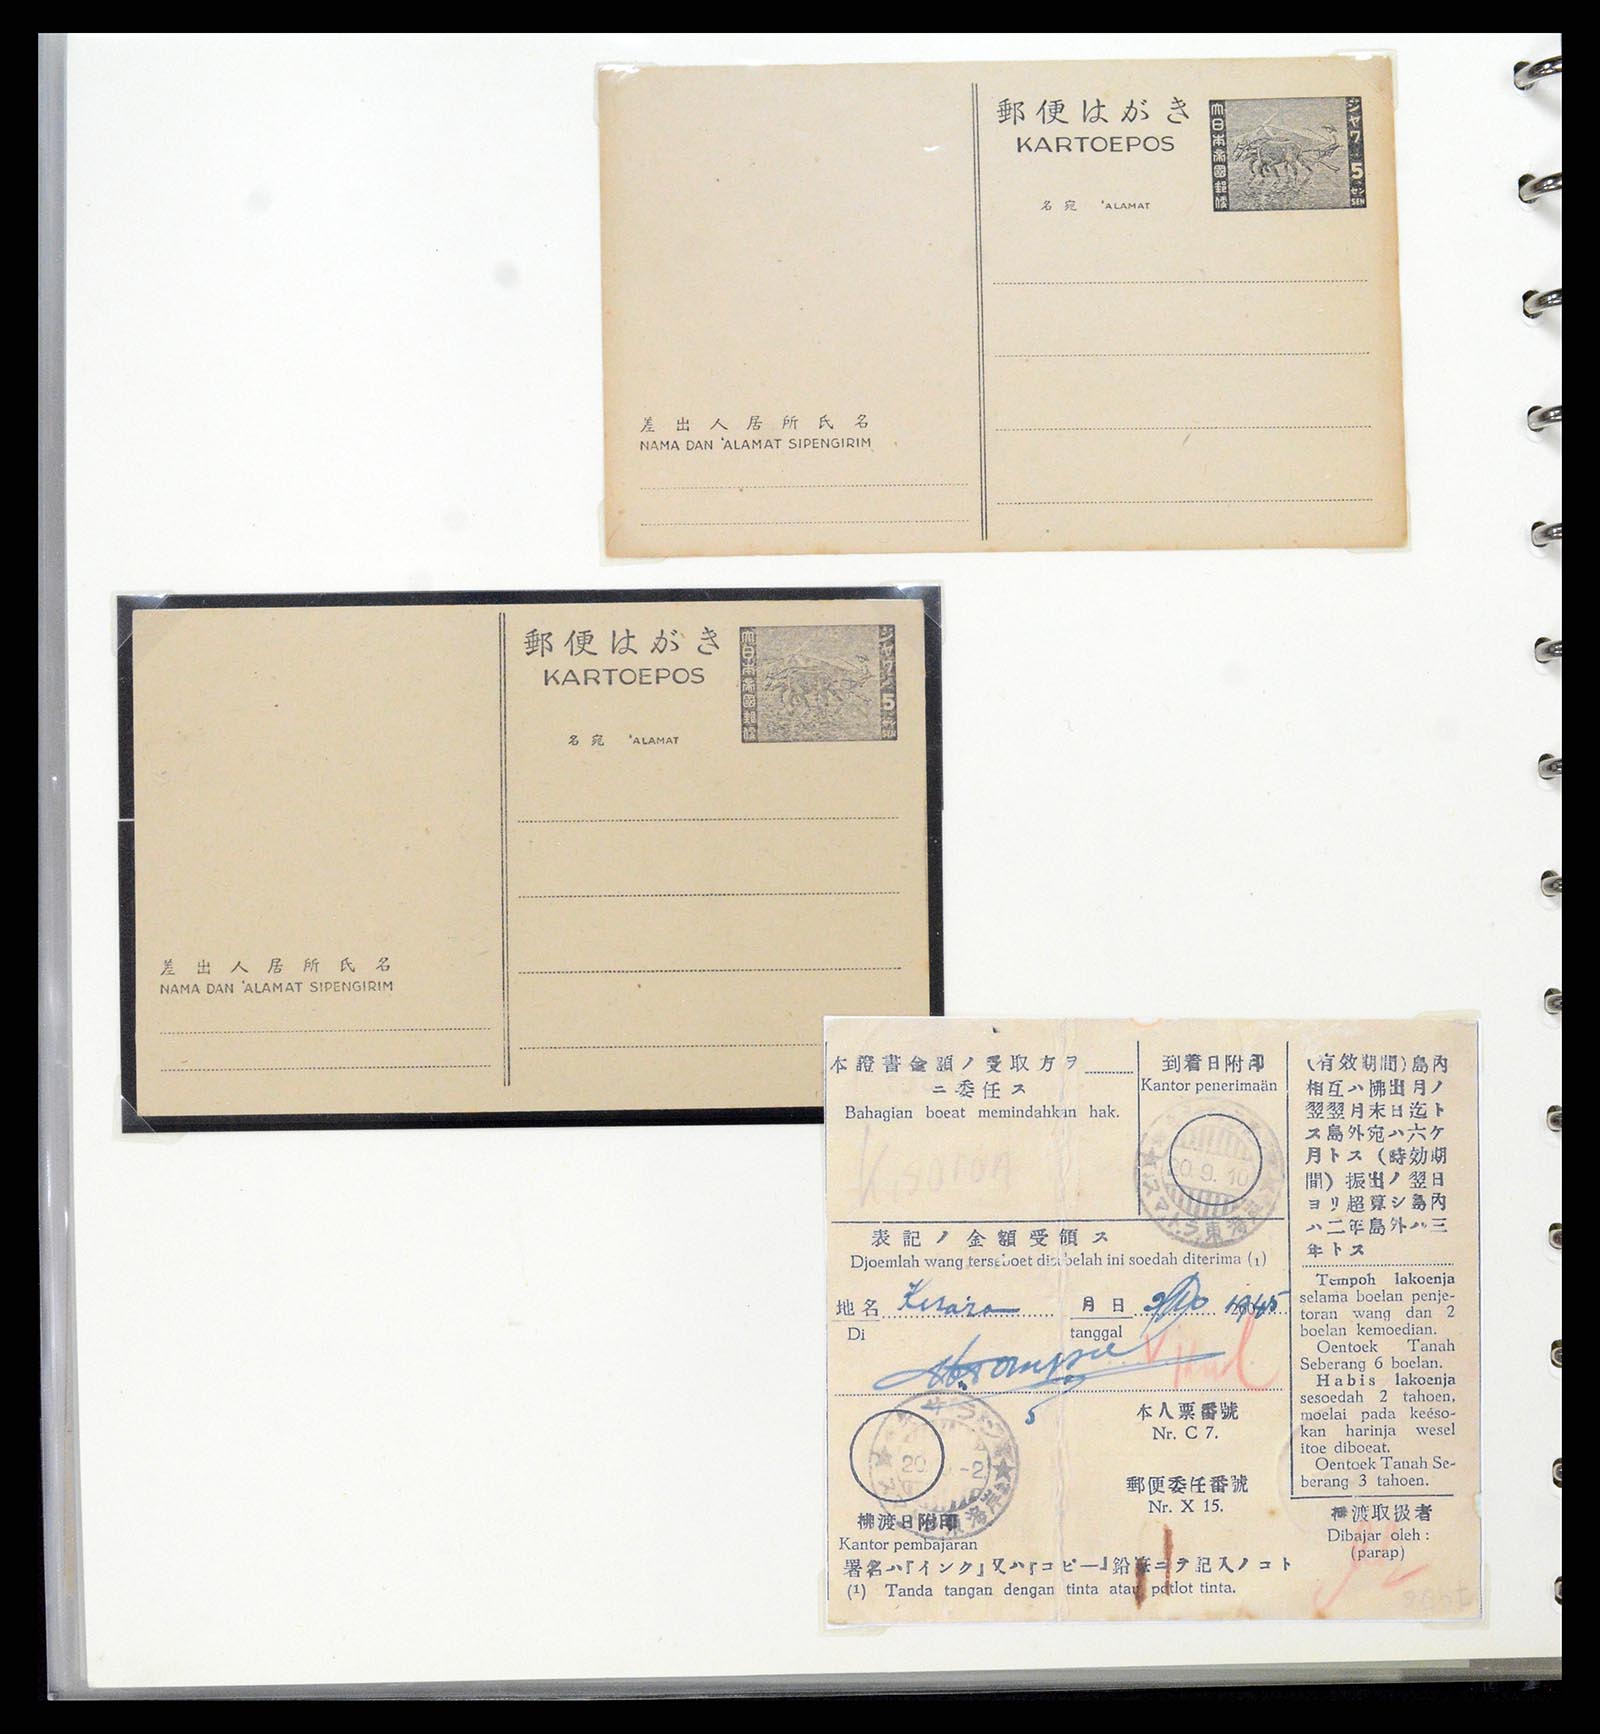 37689 022 - Stamp collection 37689 Japanese occupation Dutch East Indies and interim